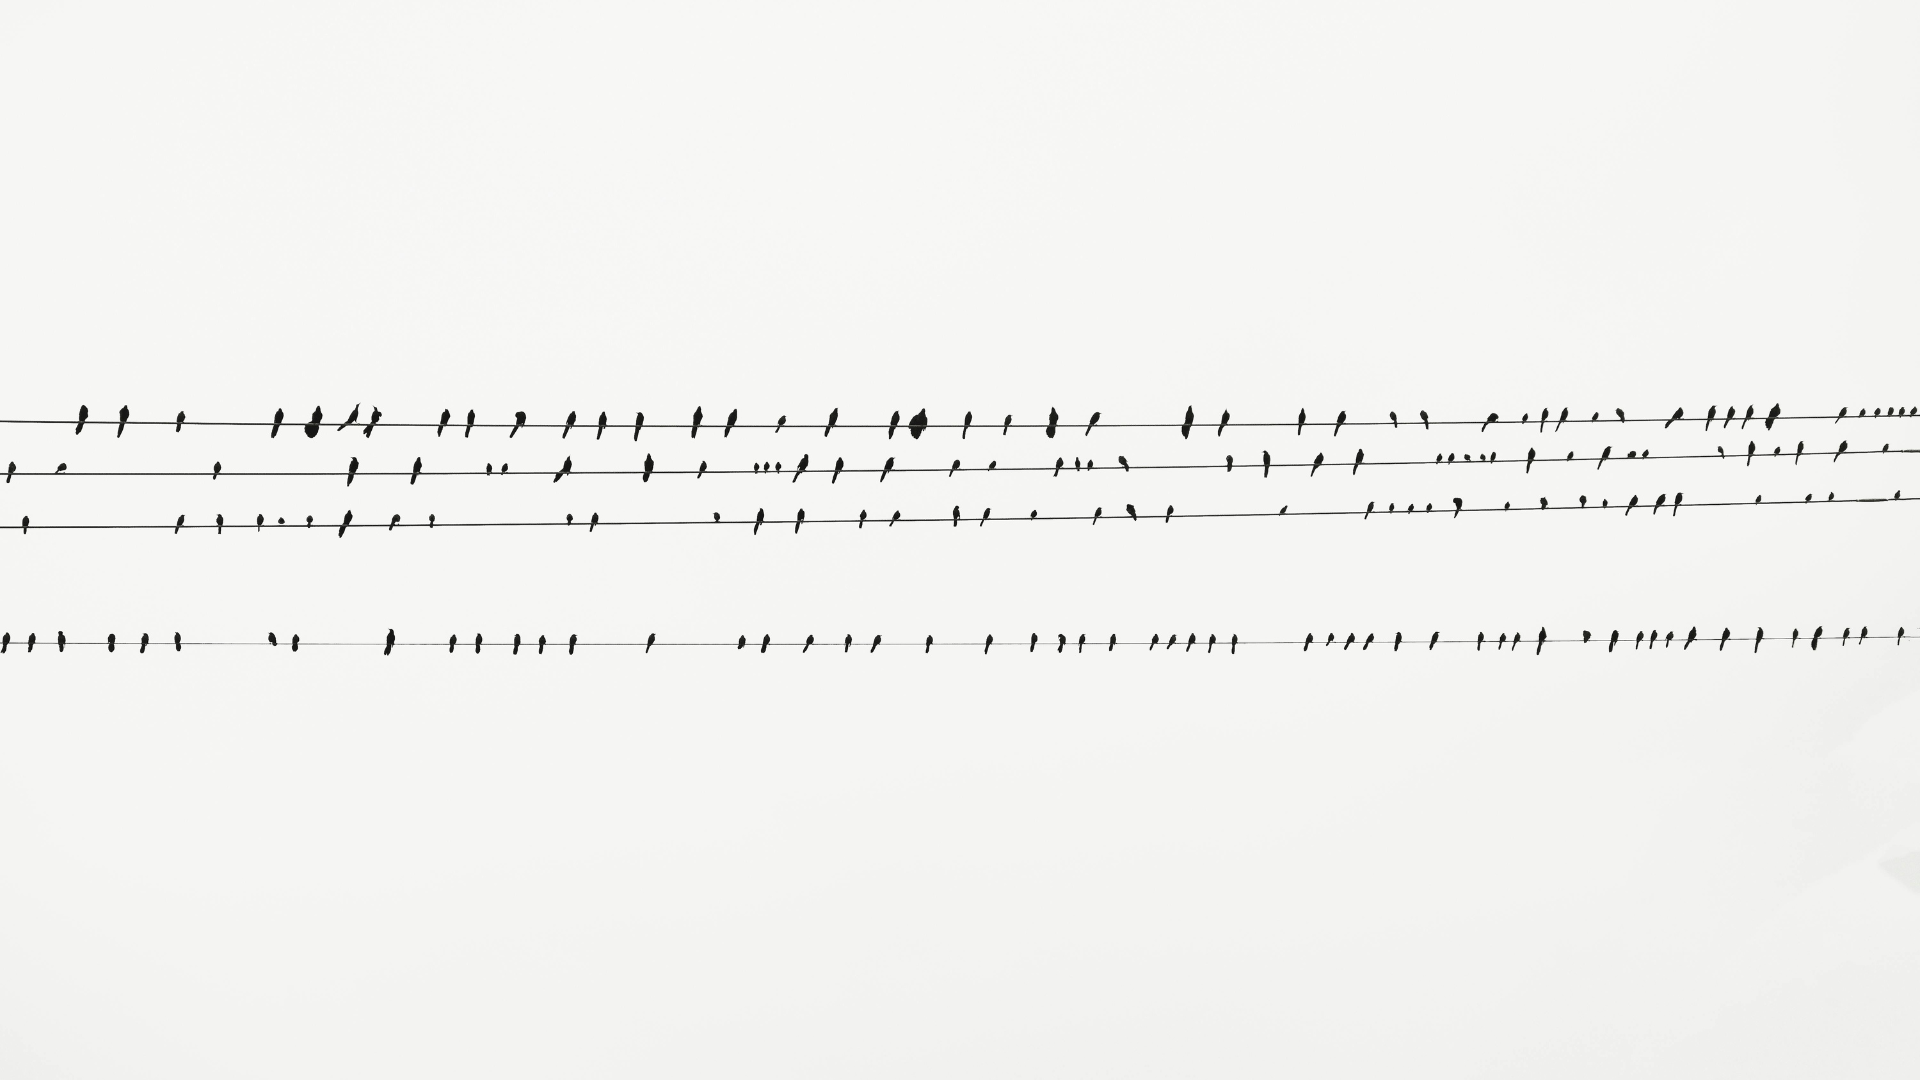 Dozens of small black birds perching on four horizontal stacked rows of power lines against a bright white background in black and white photography